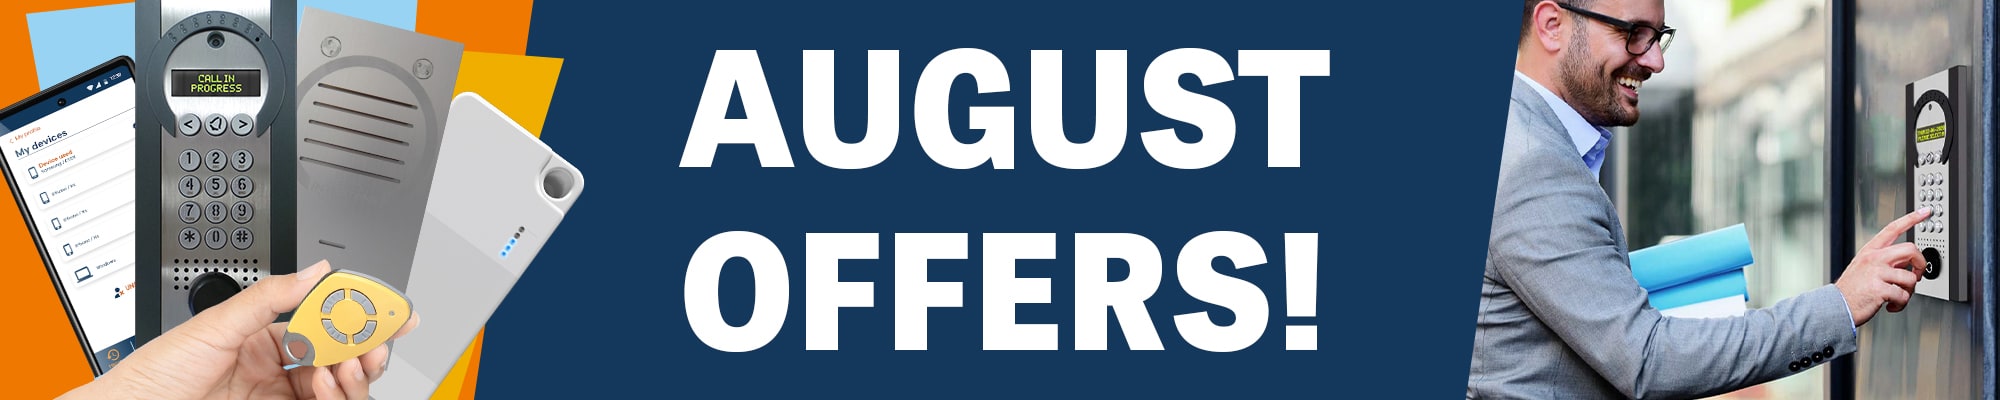 August Offers!